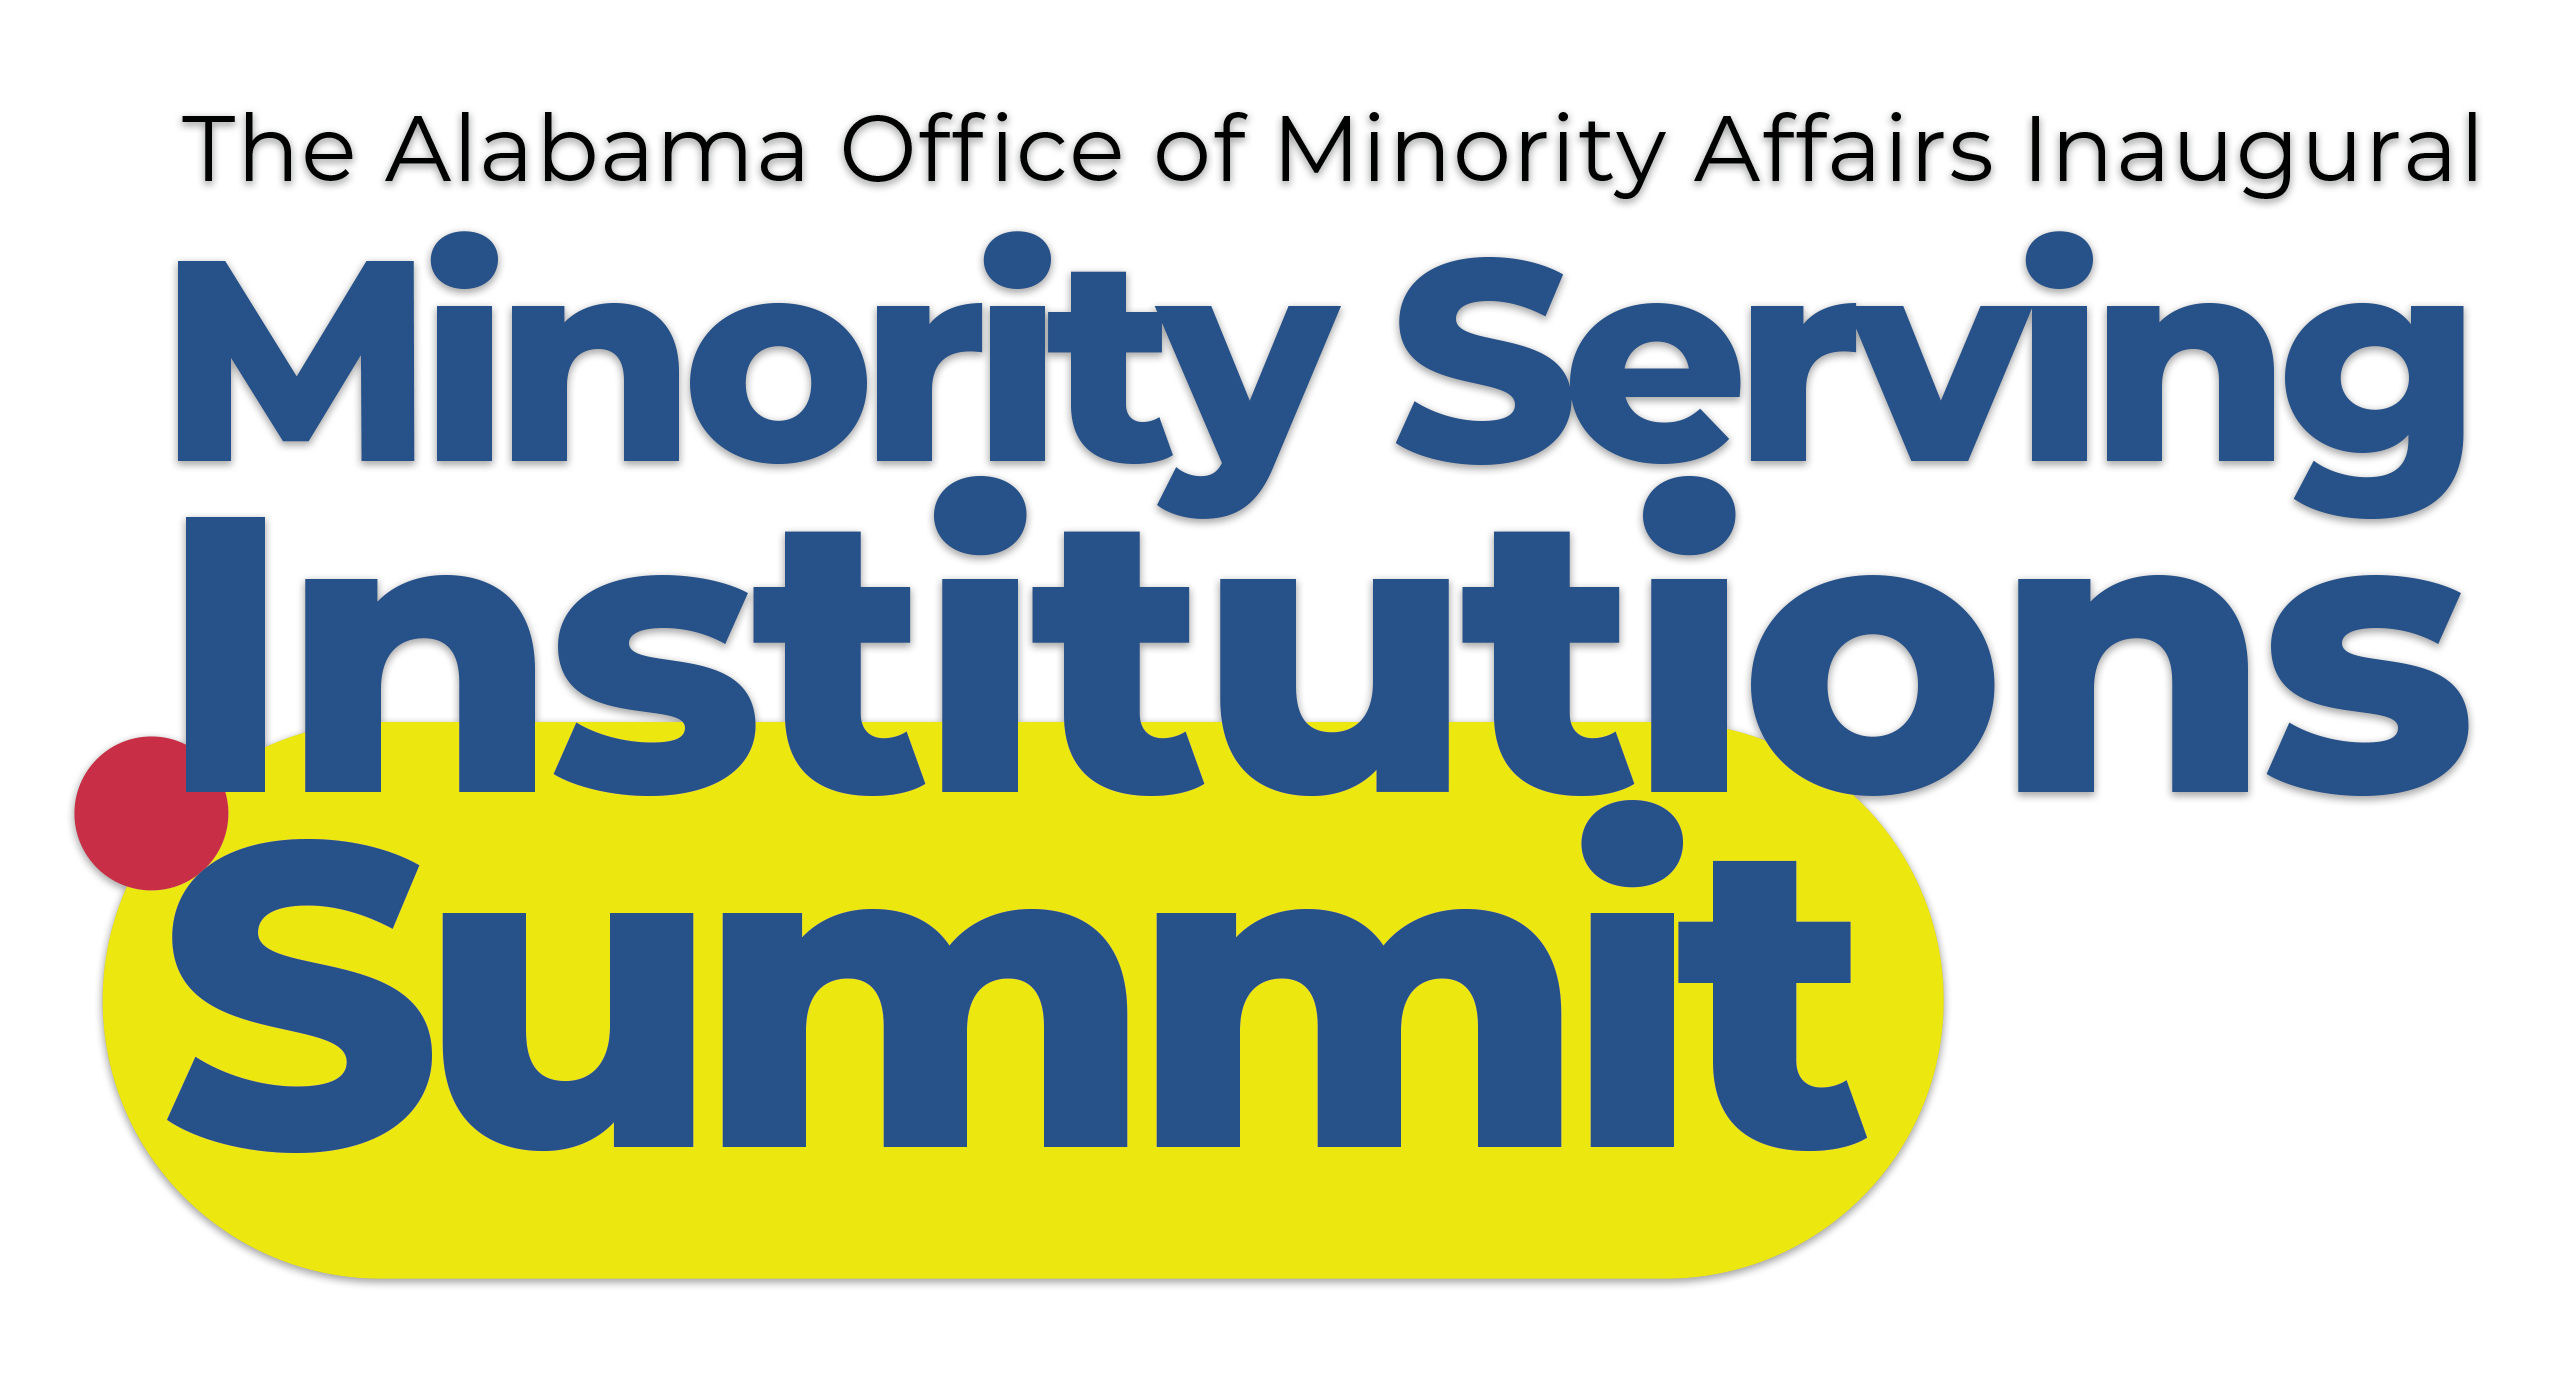 The Minority Serving Institutions (MSI) Summit